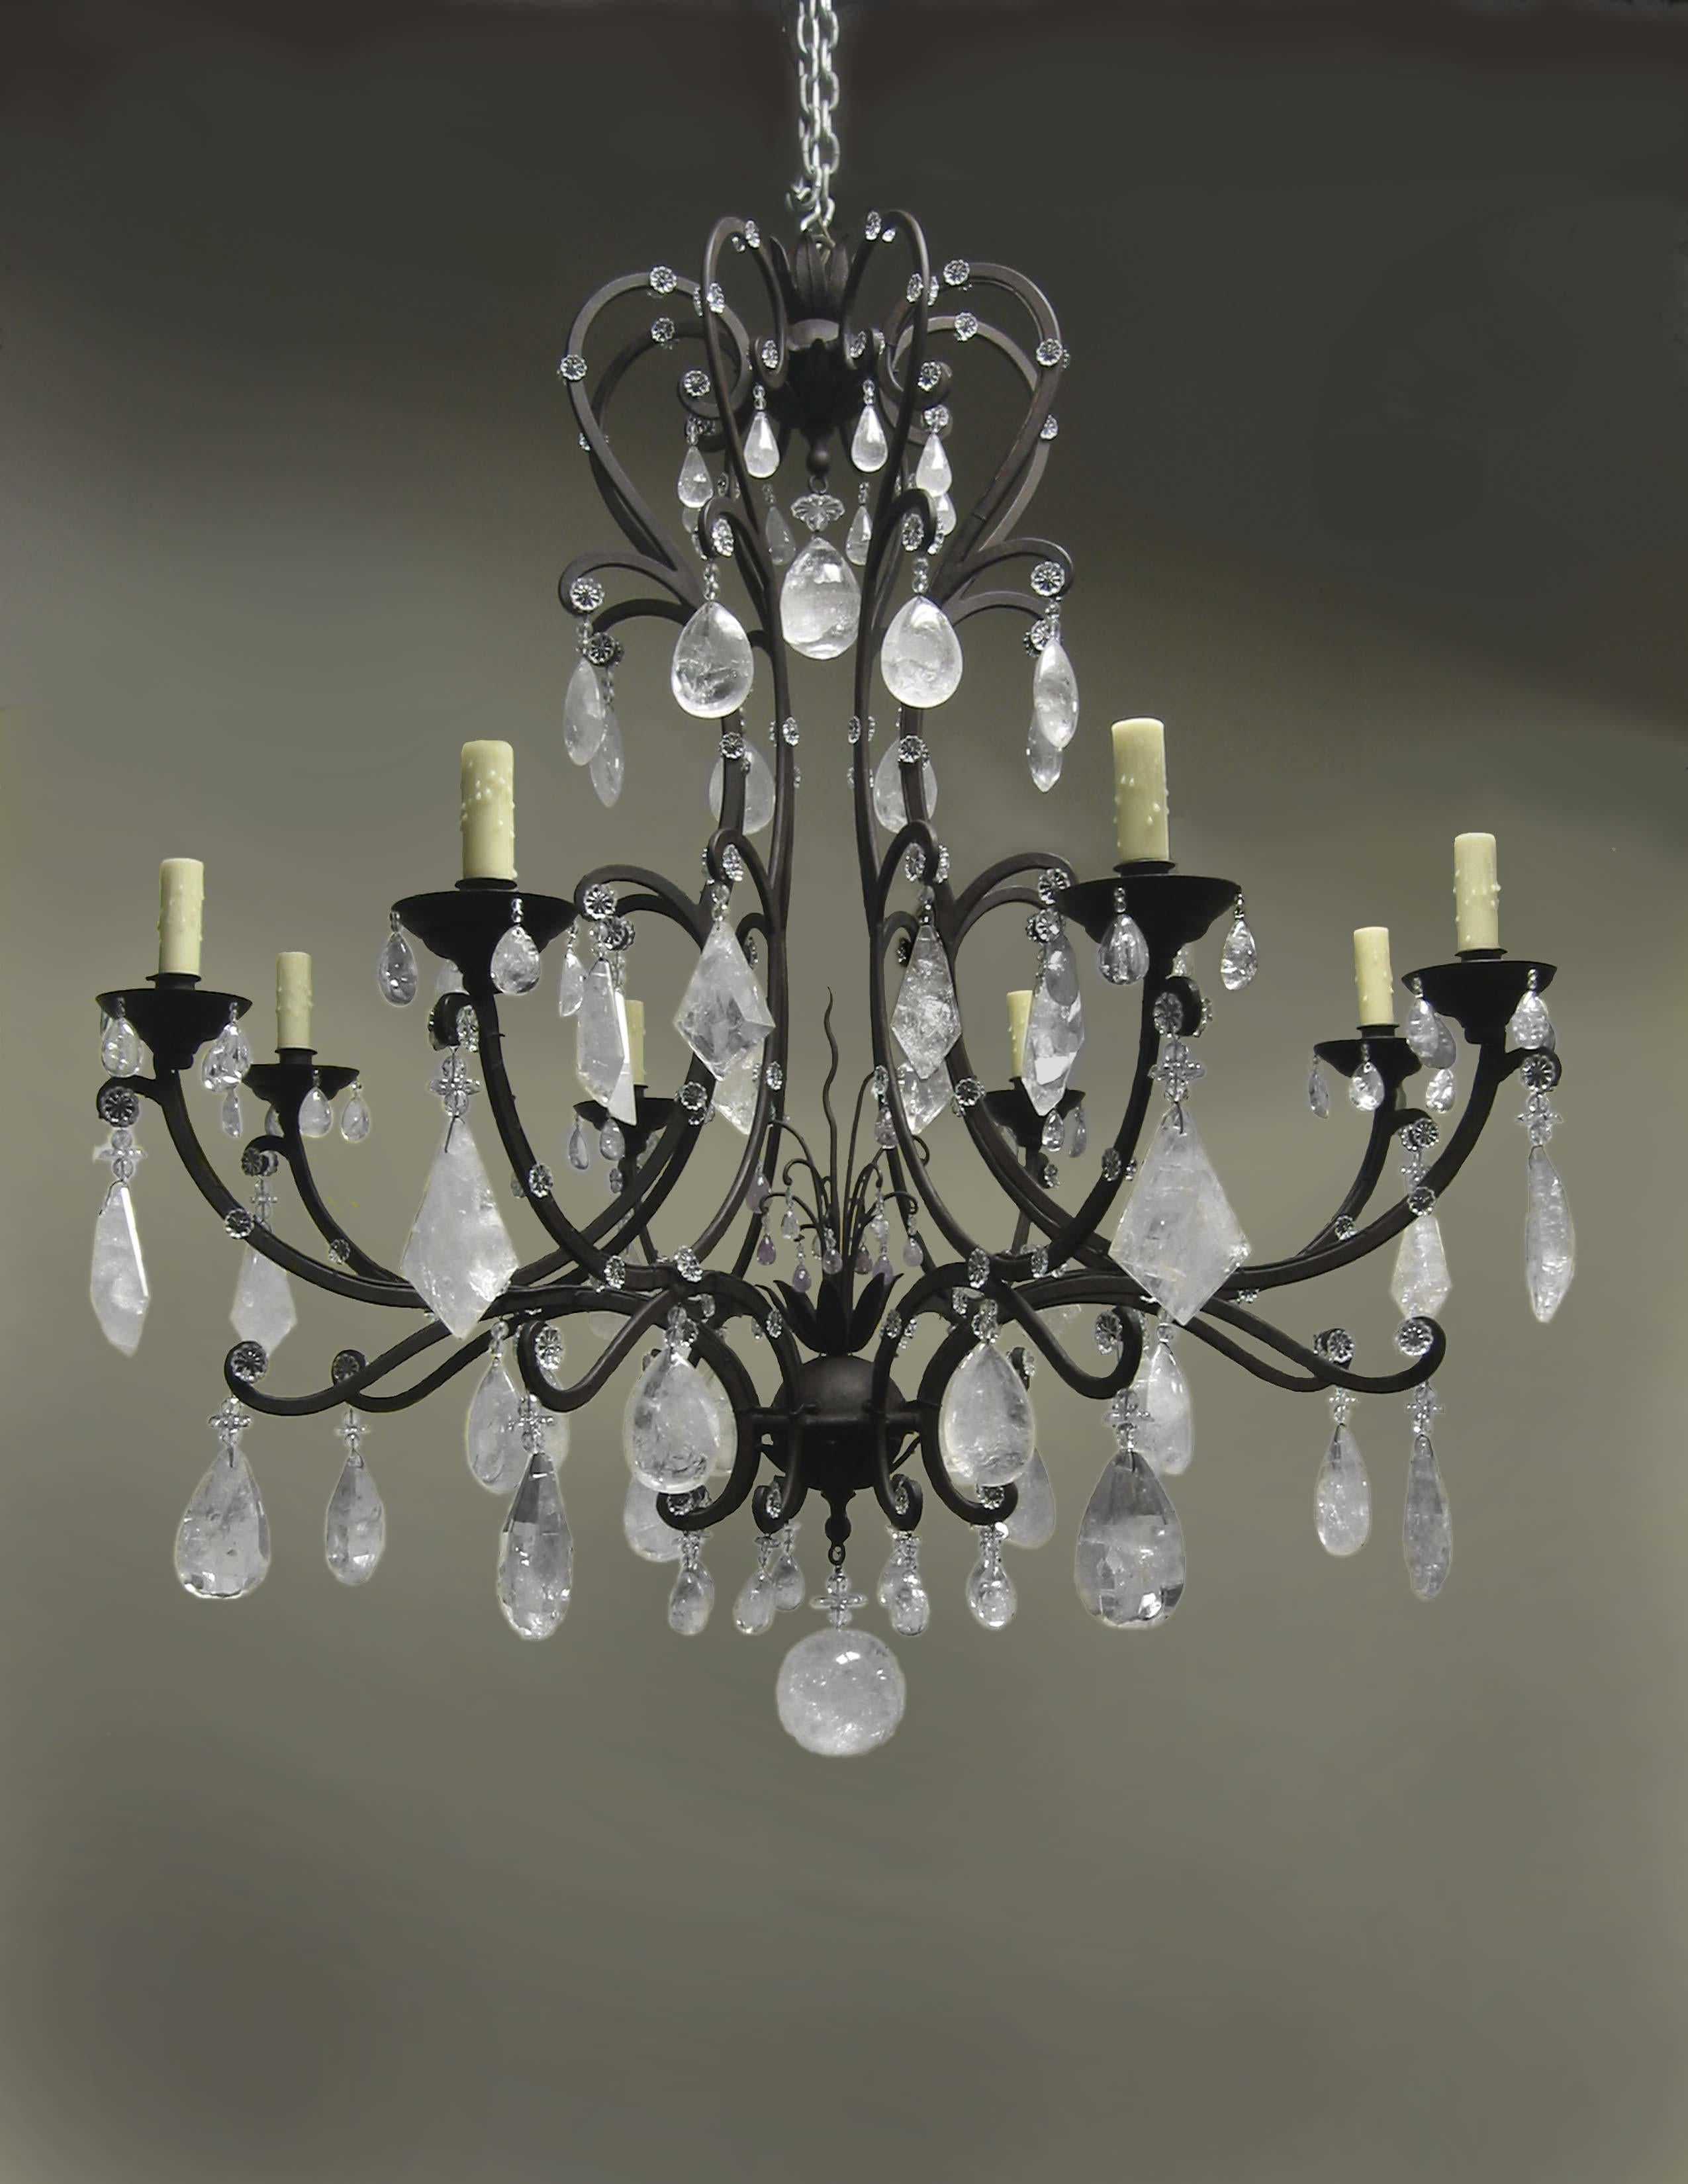 A beautiful rock crystal and wrought iron Genoese chandelier
hand-carved and polished rock crystal prisms mounted on a hand-forged wrought iron chandelier frame. (Antique black finish)
With handmade beeswax candle sleeves.
Includes a matching